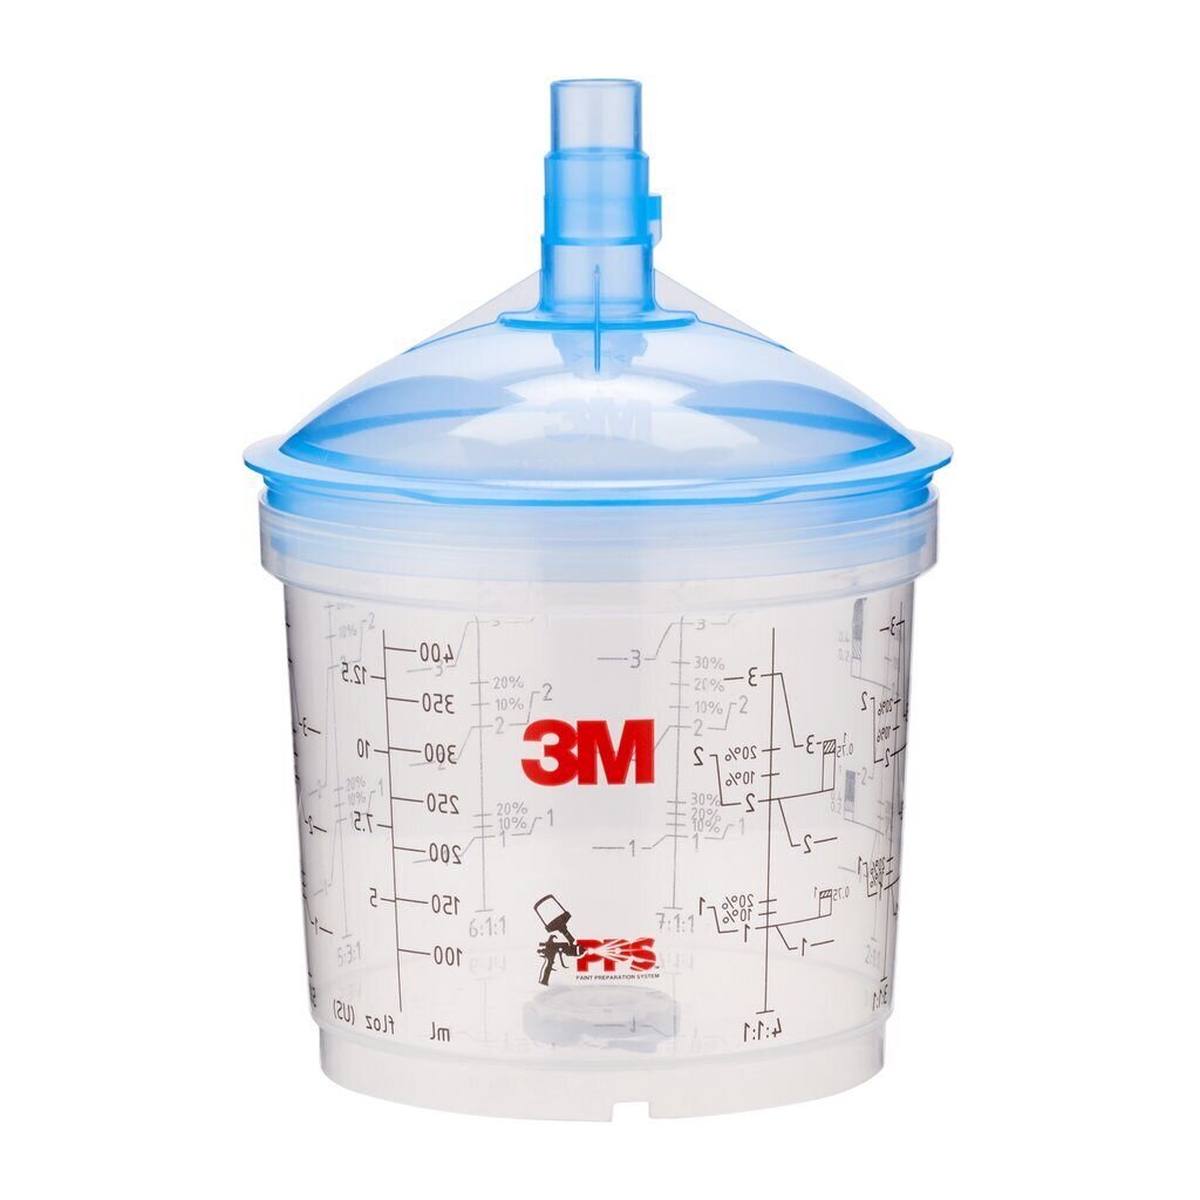 3M PPS Type V lid and cup kits, 0.4l, 125u, 50 cups, 50 lids #16352